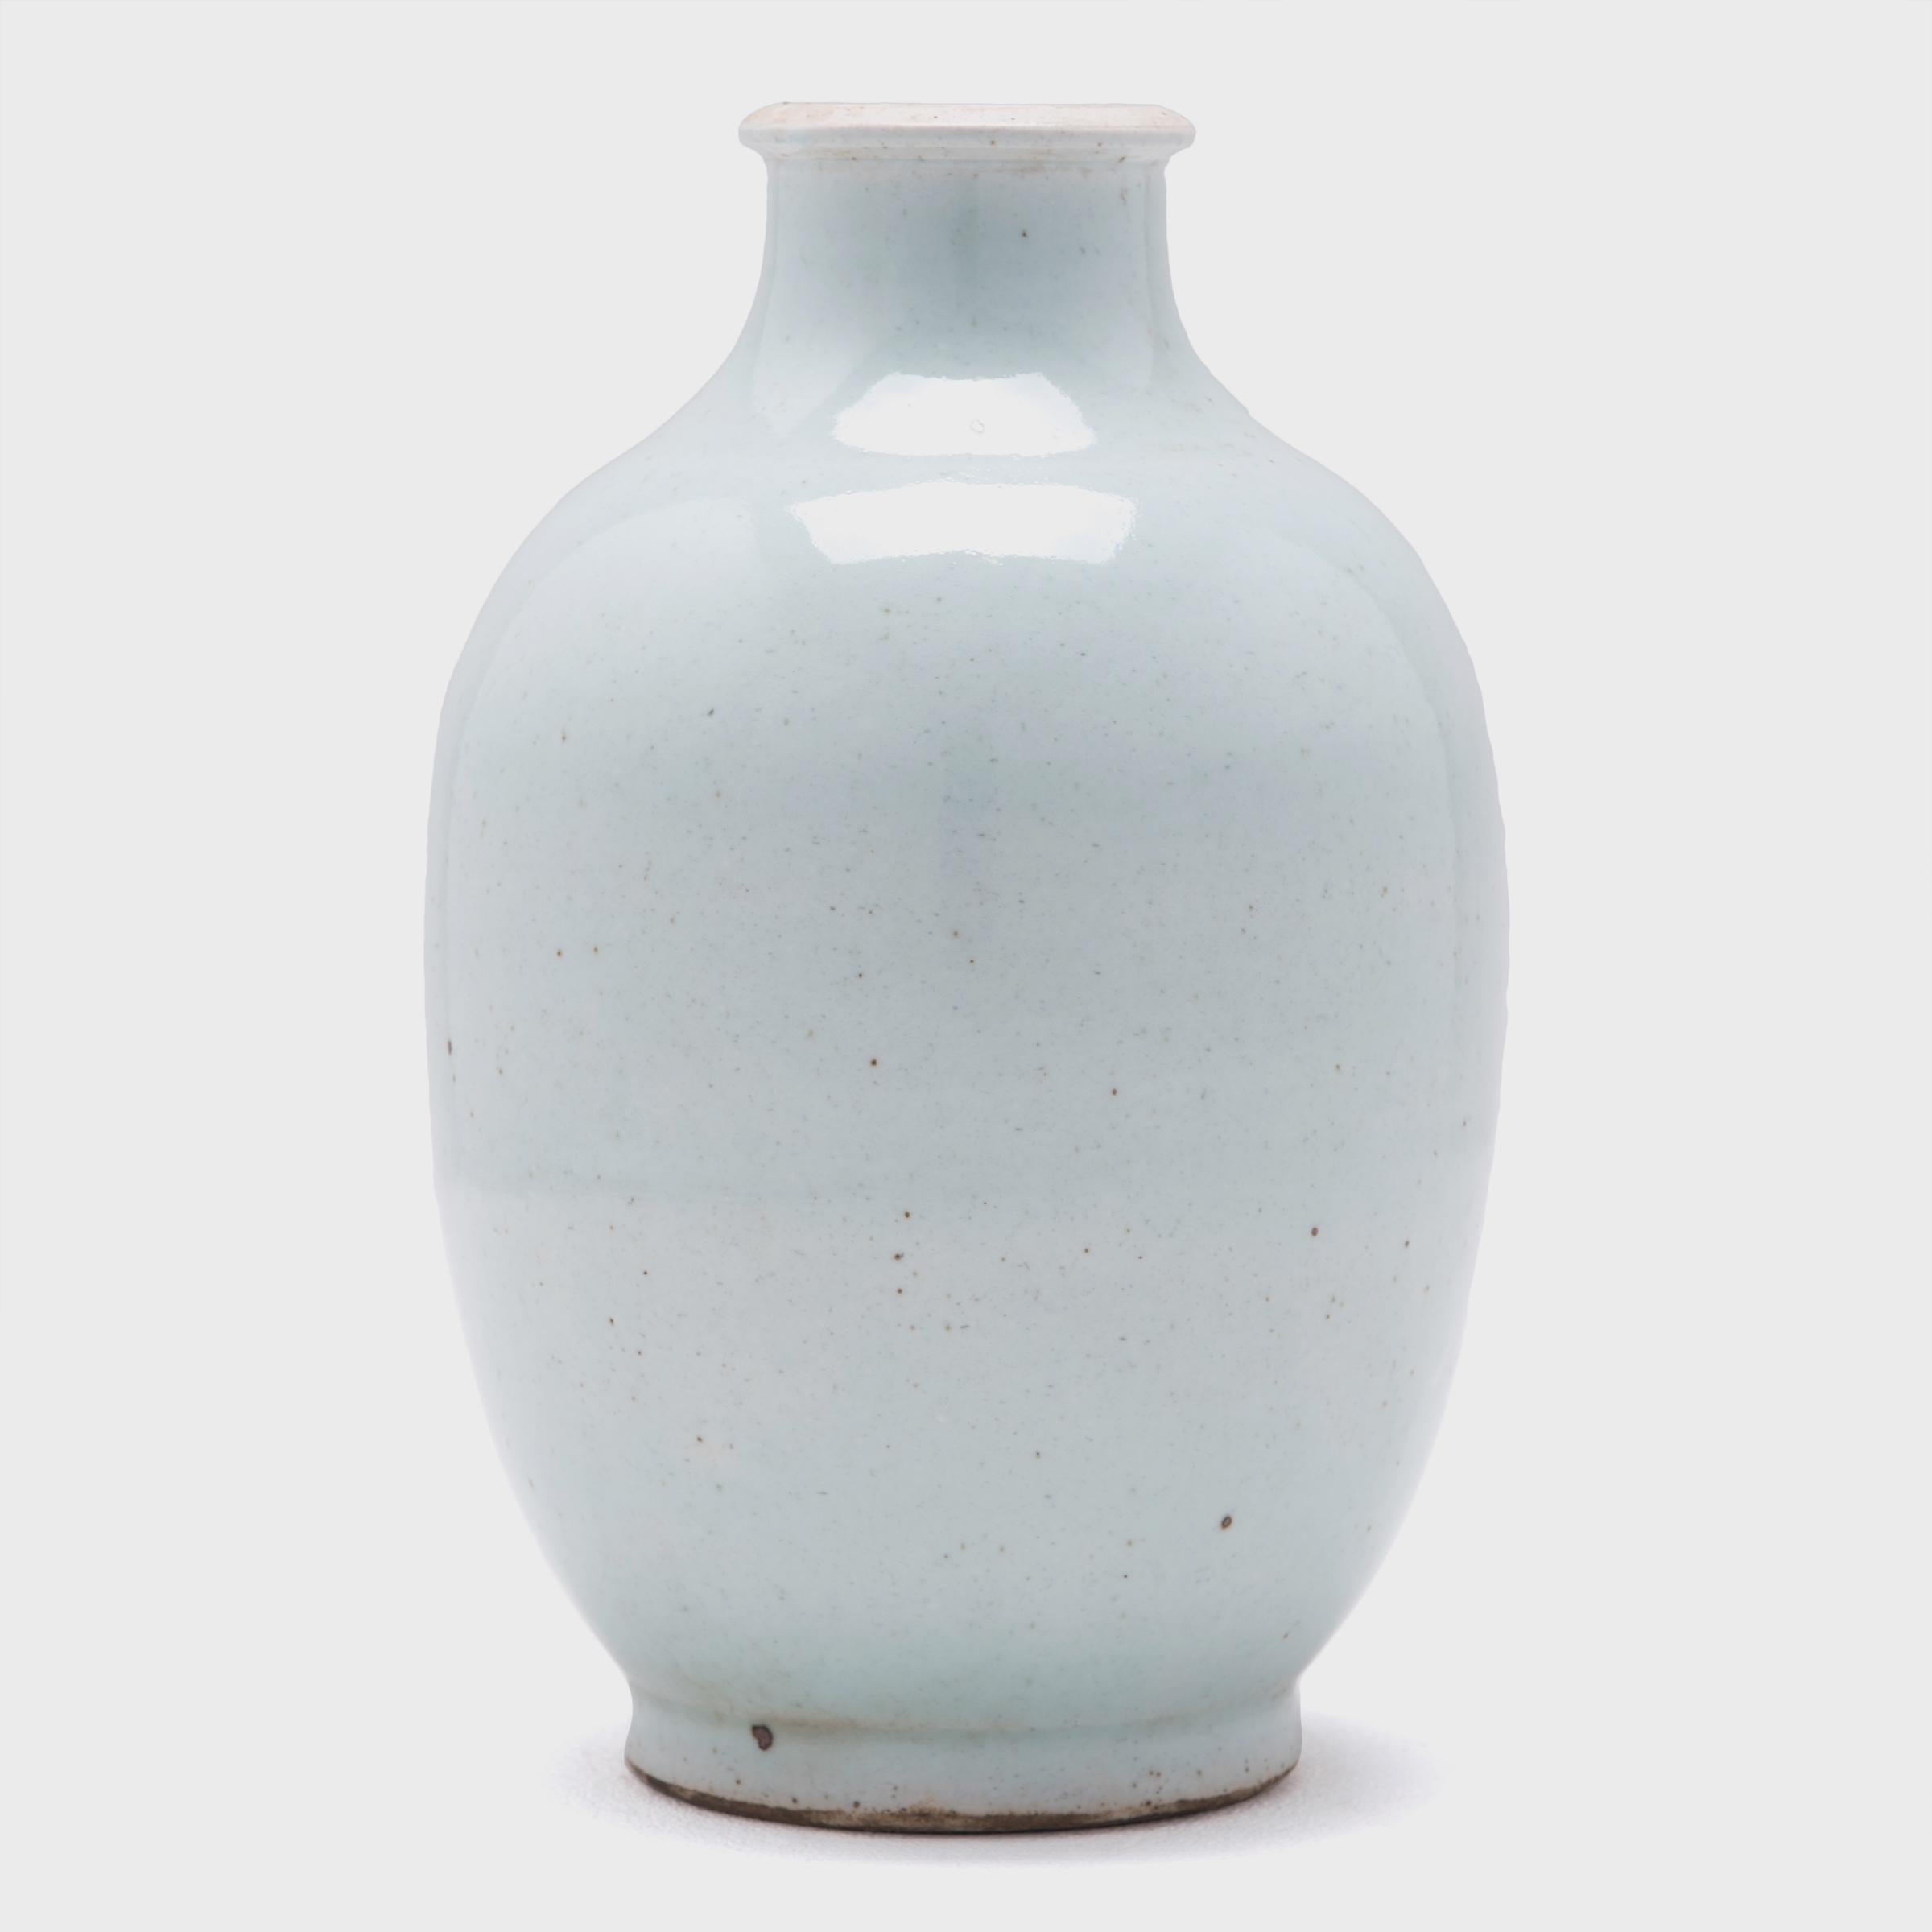 The simple, austere beauty of this exquisite wine jar is deceiving. Creating this jar, with its perfectly tapered form and cool-toned drip cloud glaze, would have required the artisan to master the ancient art of Chinese porcelain making. The